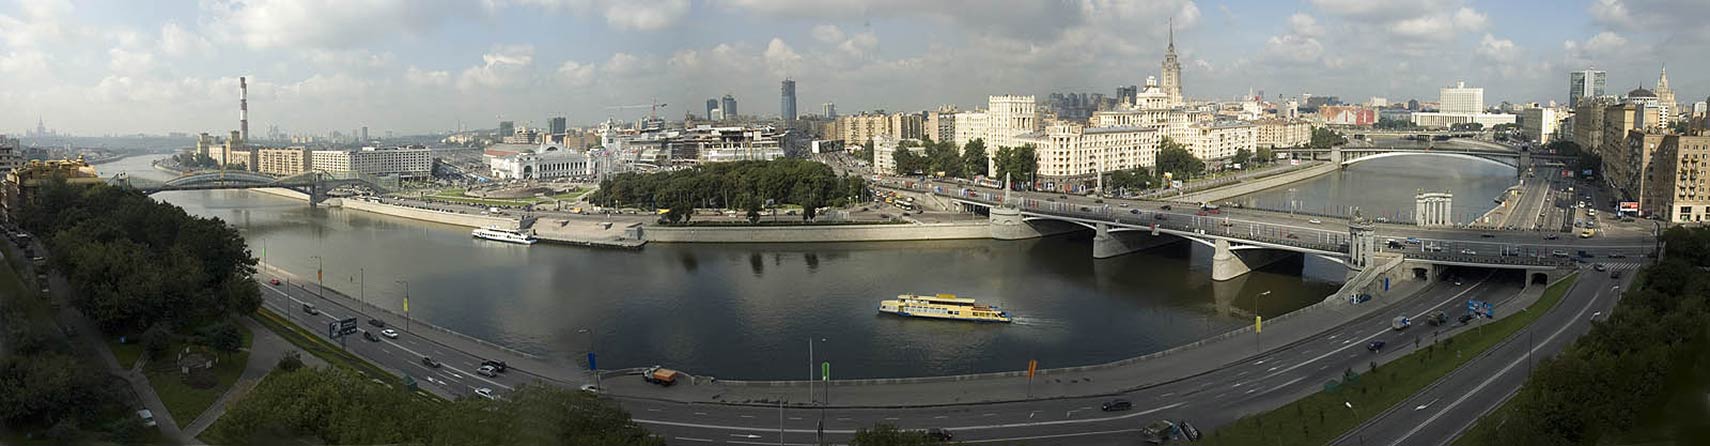 Moscow Panorama with Moskva River and Square of Europe